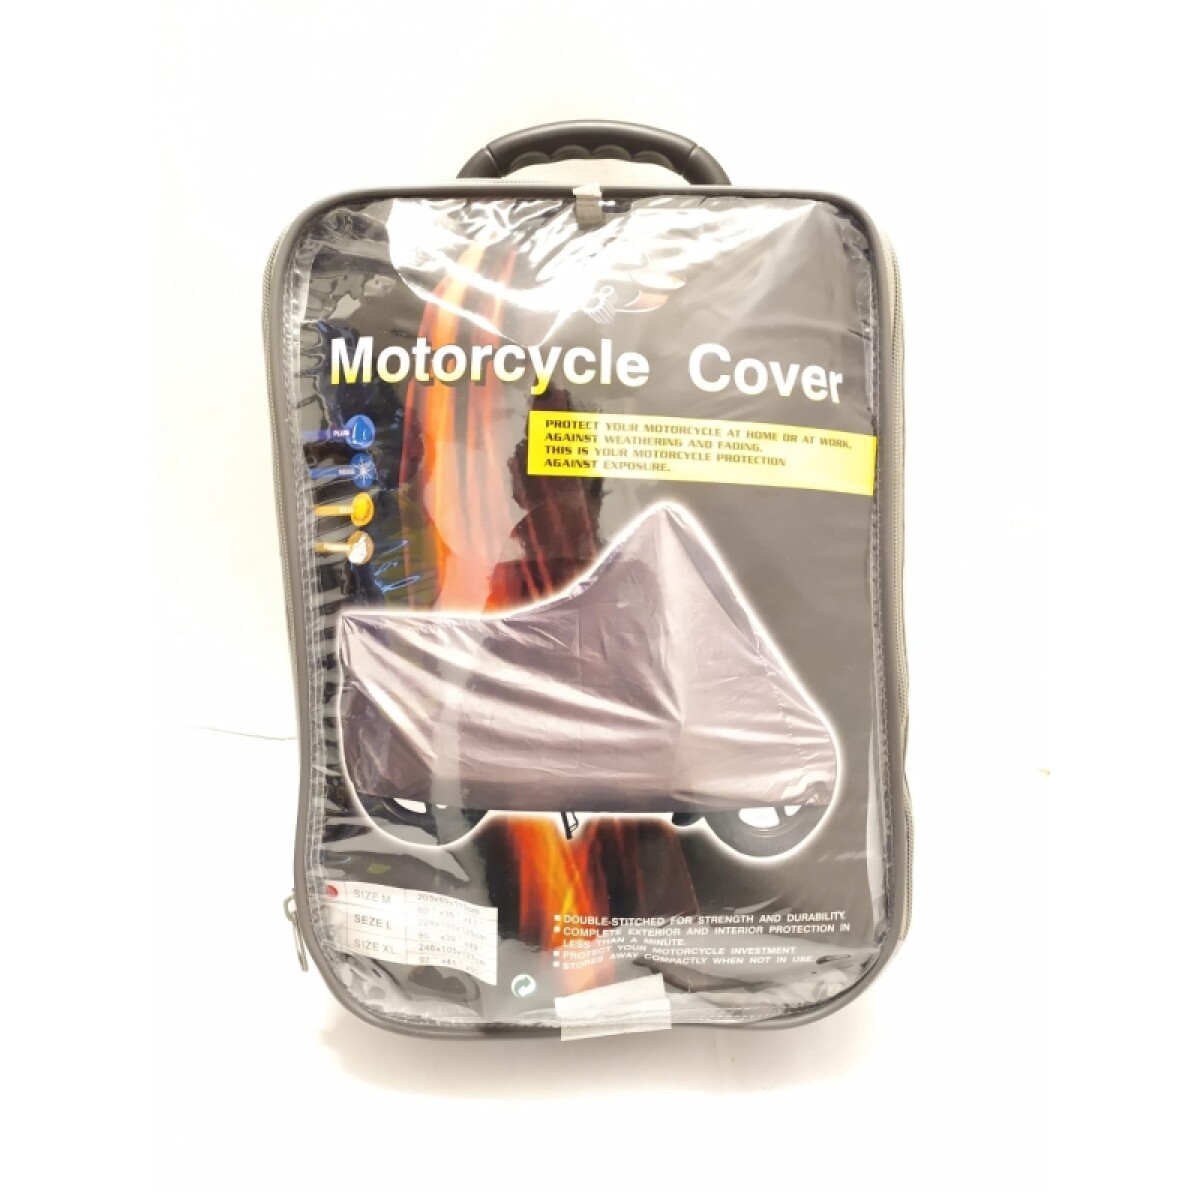 Cubre Moto Lona Impermeable Talle Xl 